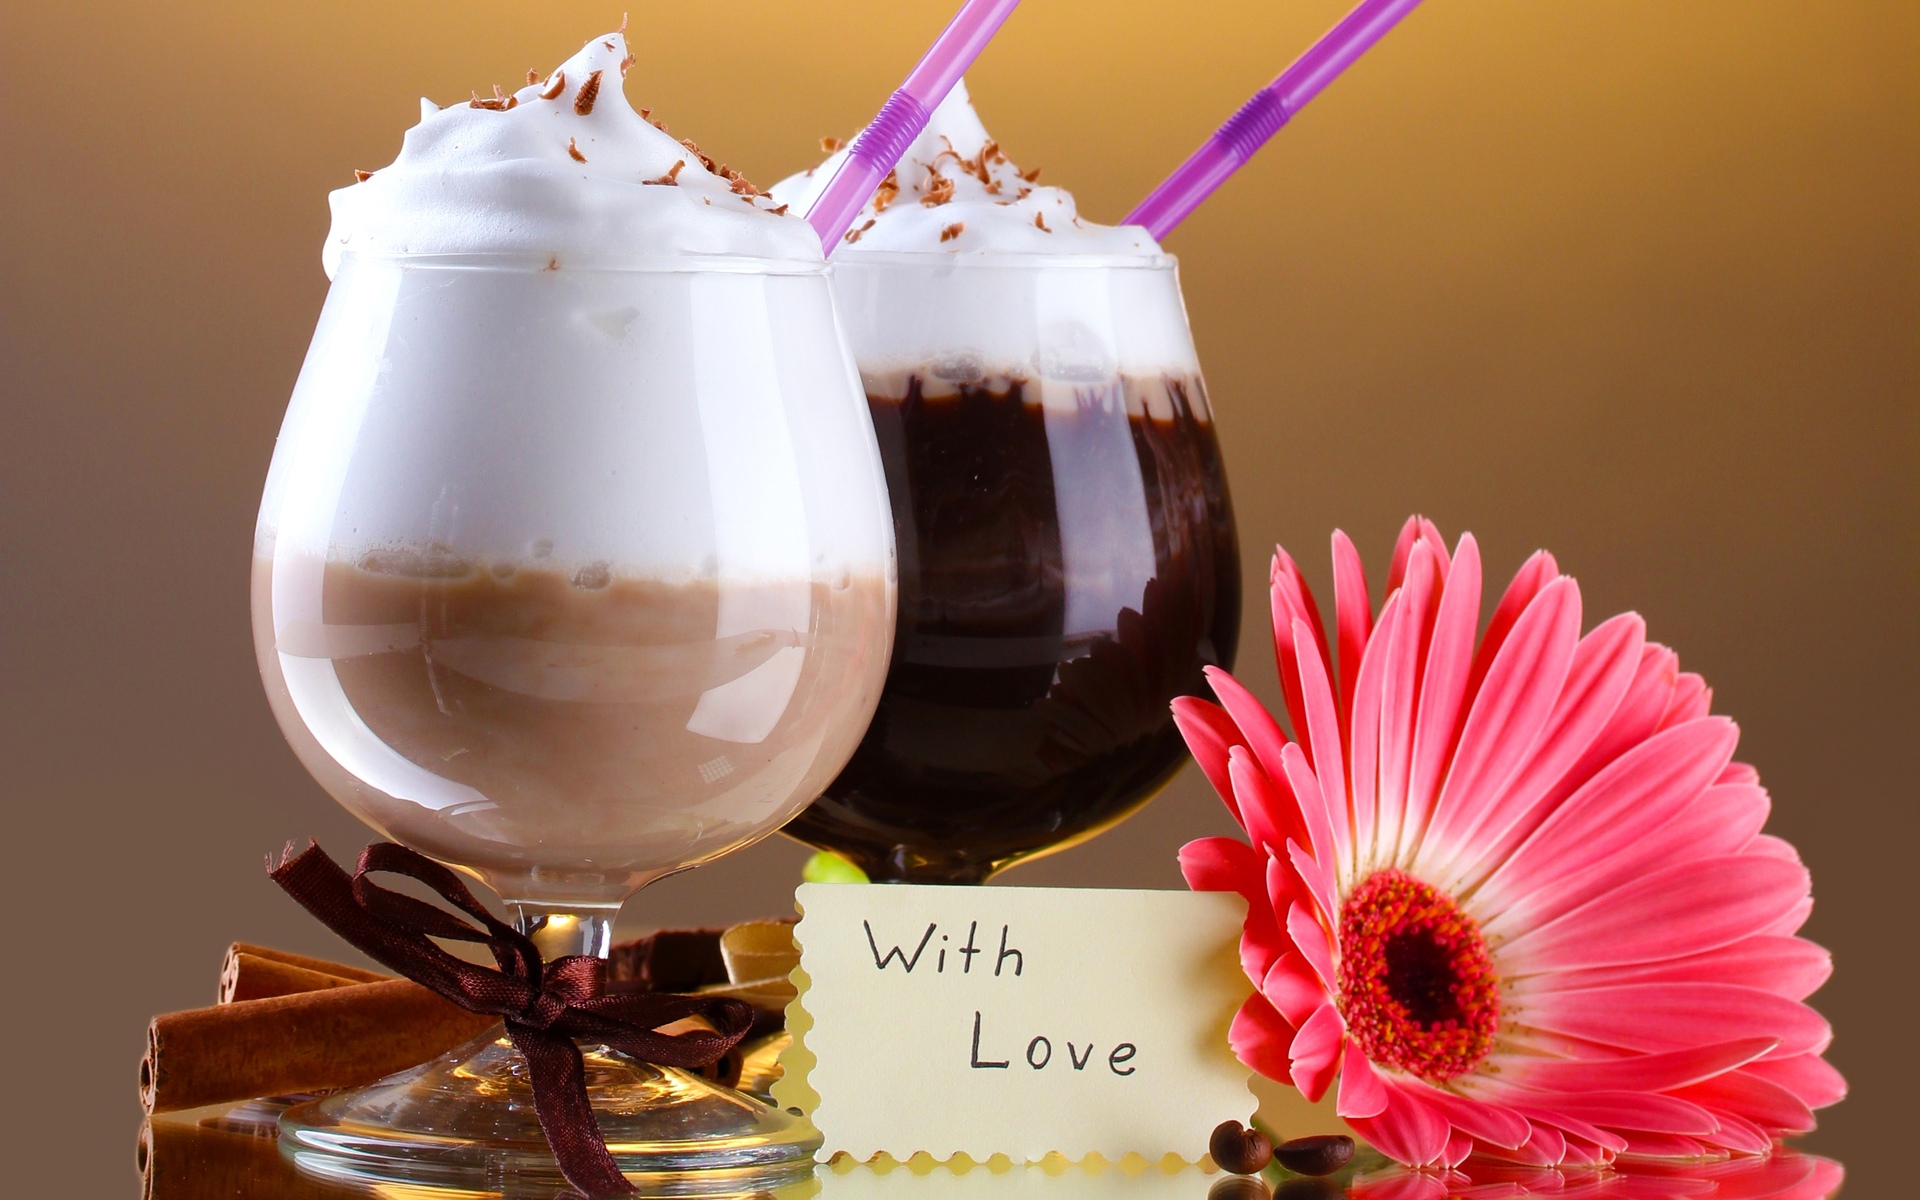 Foam Chocolate With Love Wallpaper